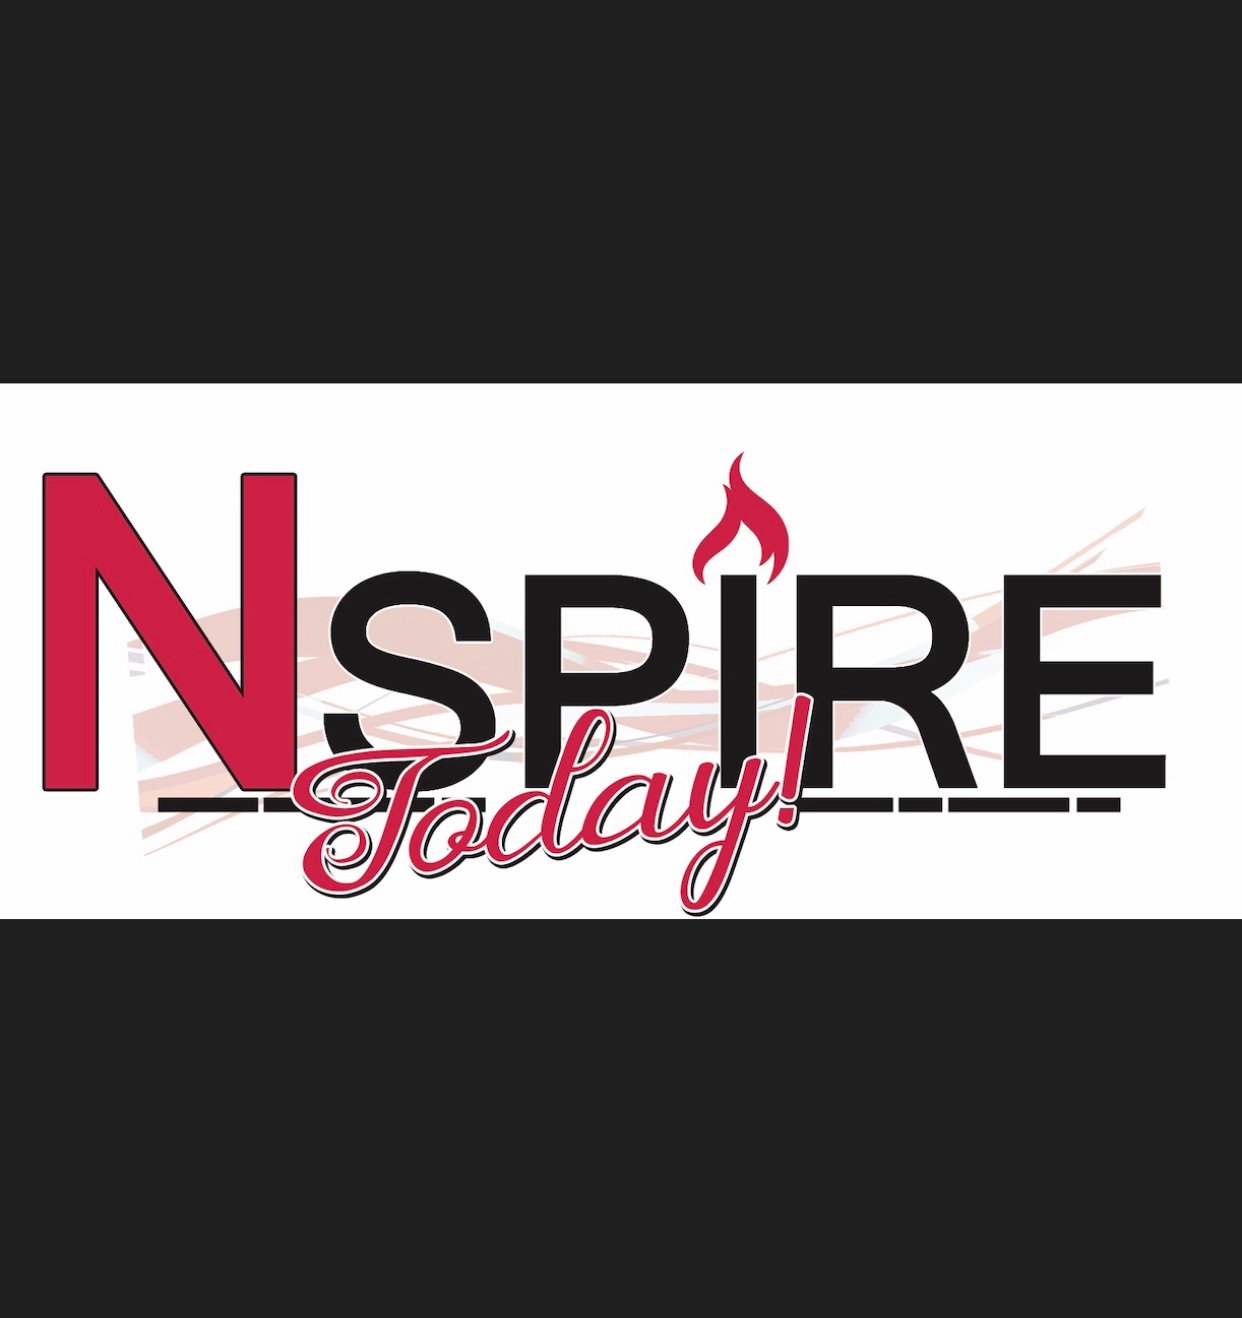 Nspire Today! is a magazine and website that aims to inspire and entertain people.